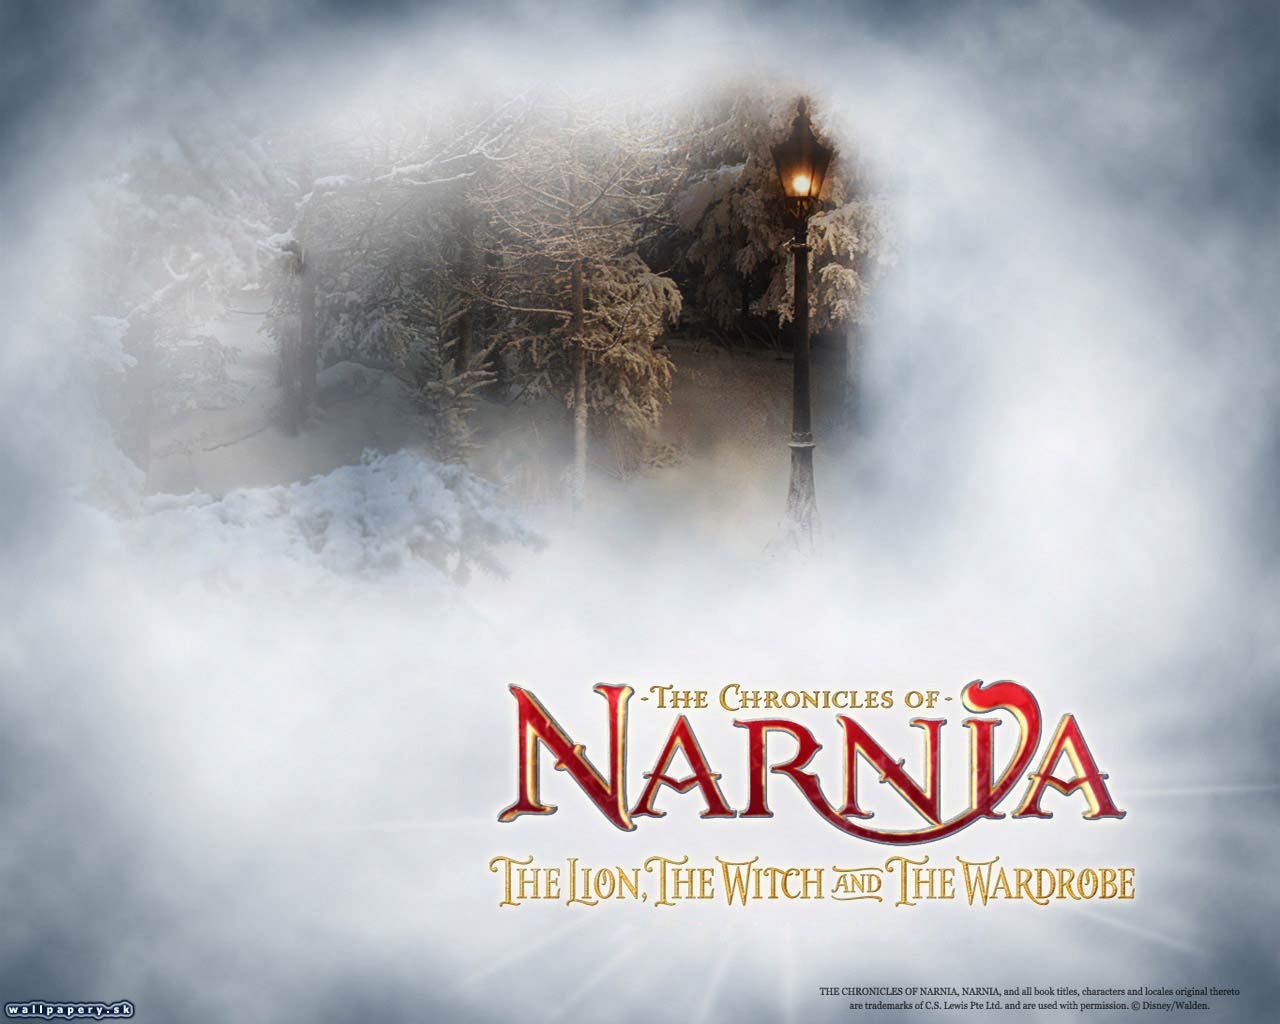 The Chronicles of Narnia: The Lion, The Witch and the Wardrobe - wallpaper 7